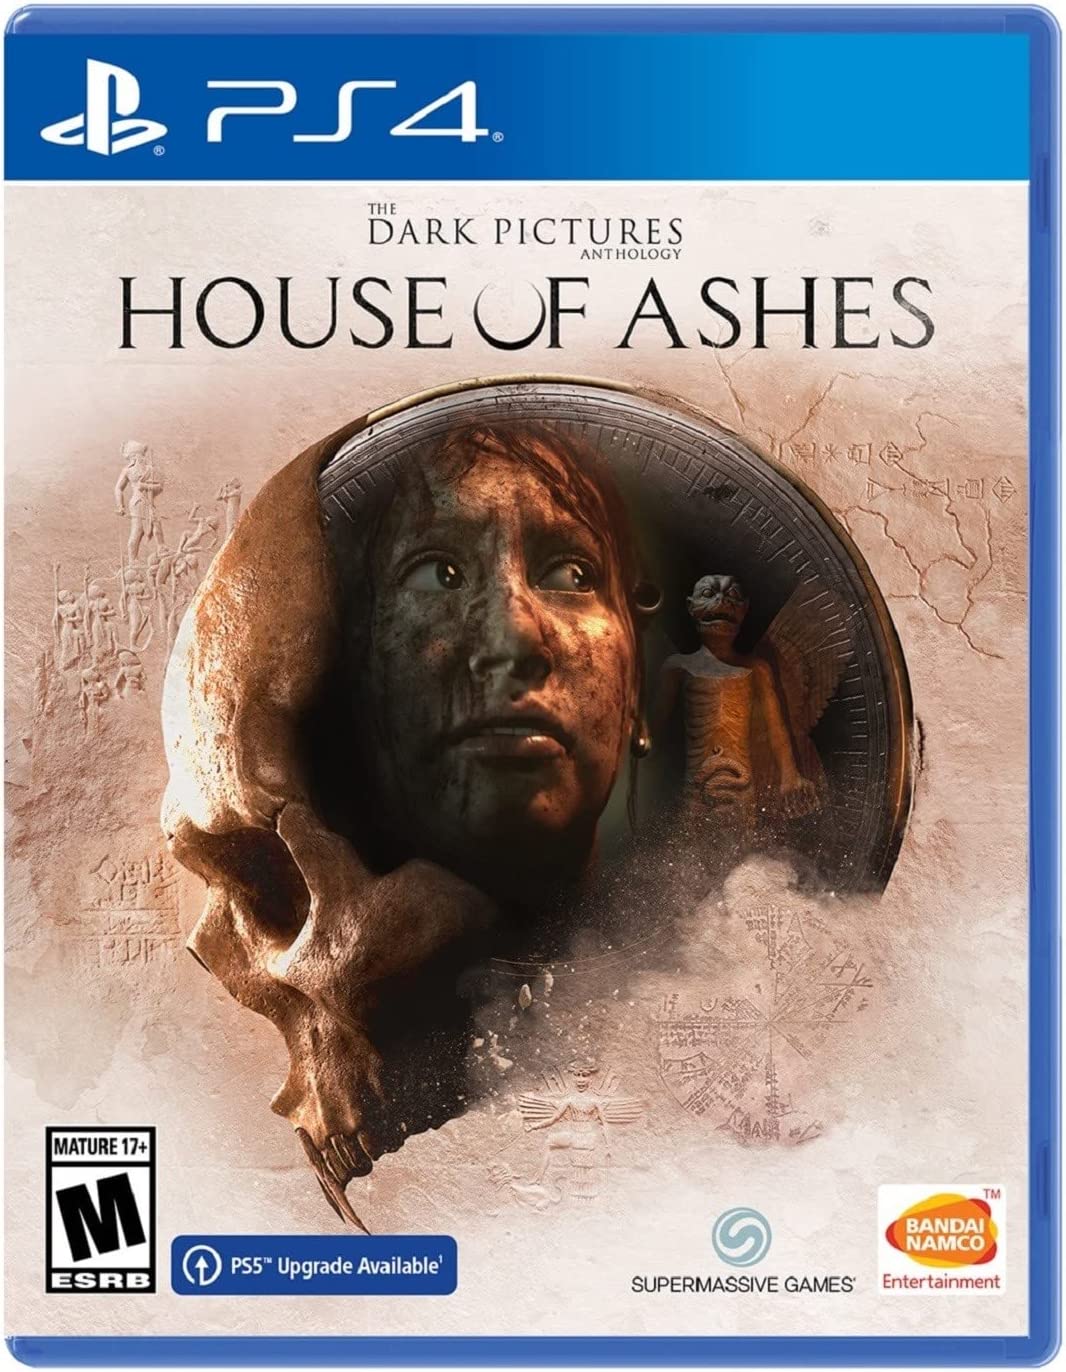 [PS4] The Dark Pictures Anthology: House of Ashes